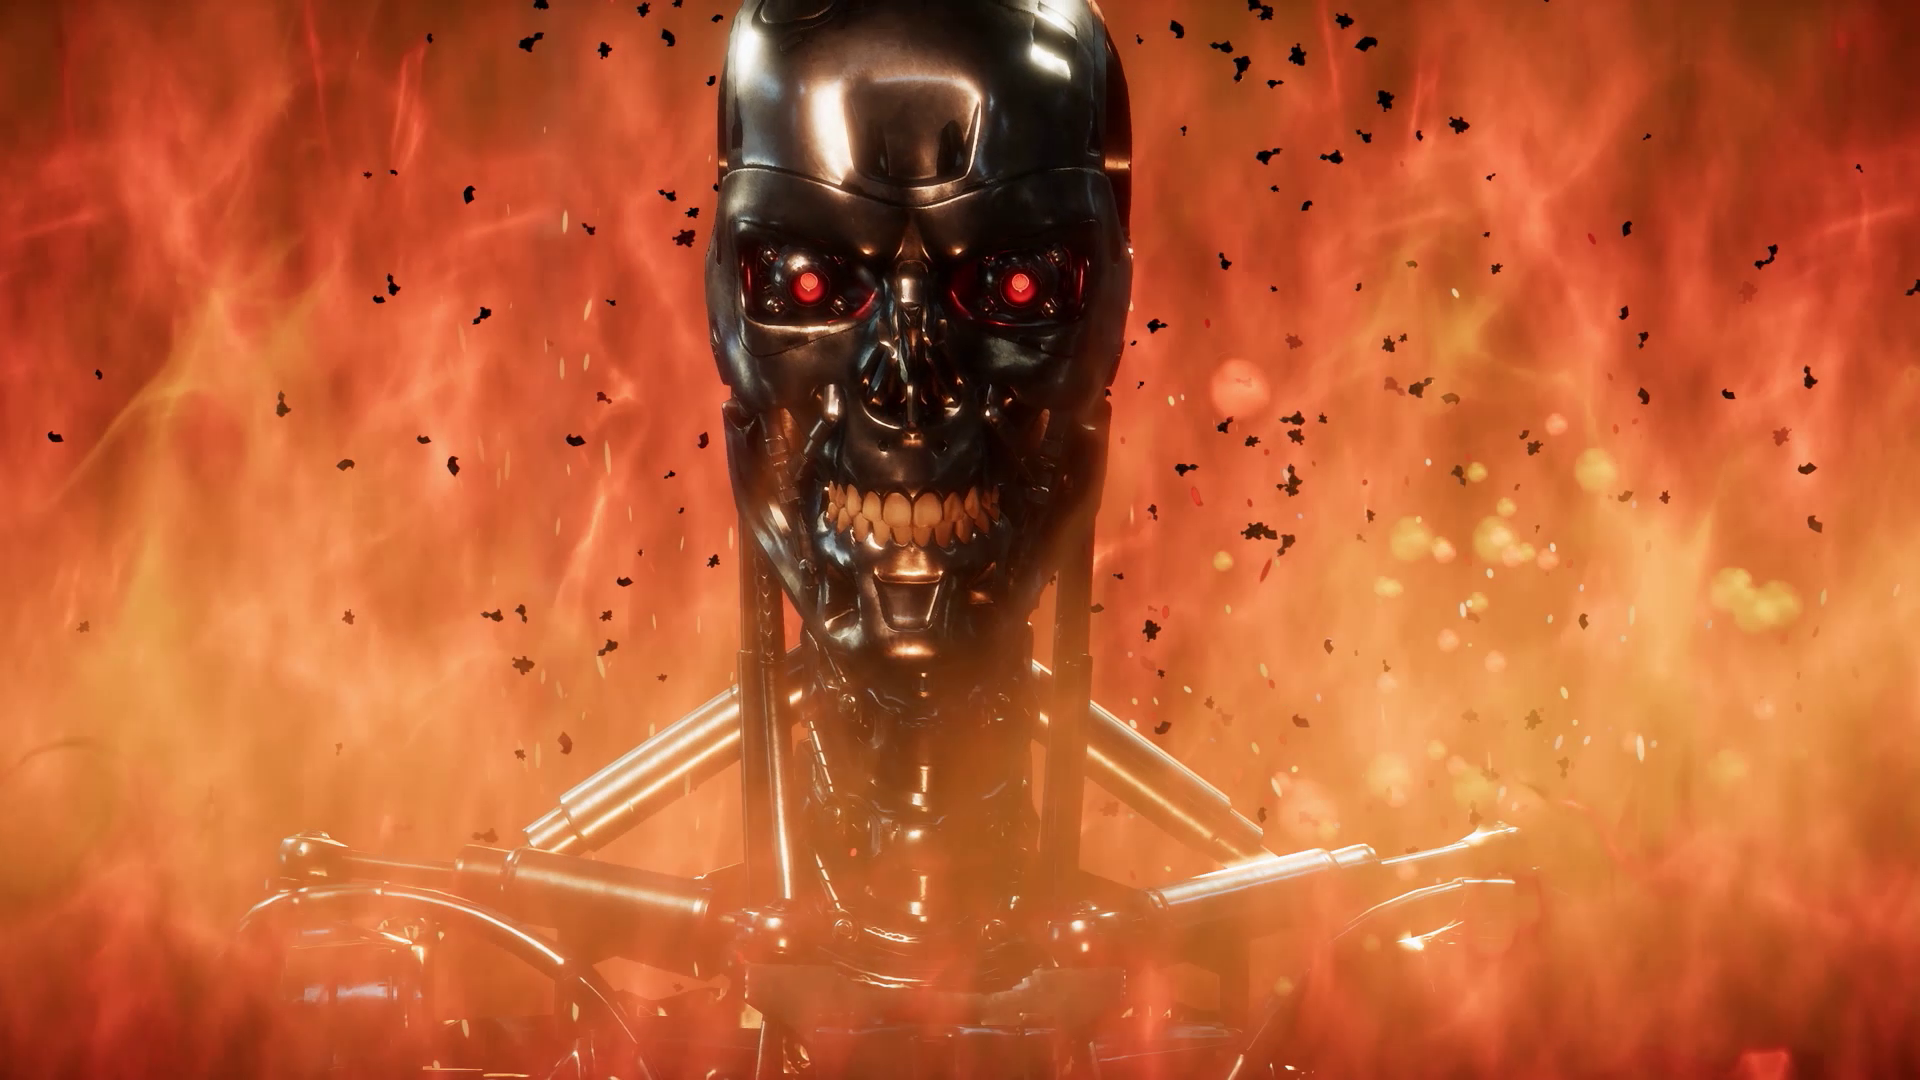 Arnold Schwarzenegger's Terminator has joined the cast of 'Mortal Kombat ' and it's just as wild as you'd imagine. Business Insider India